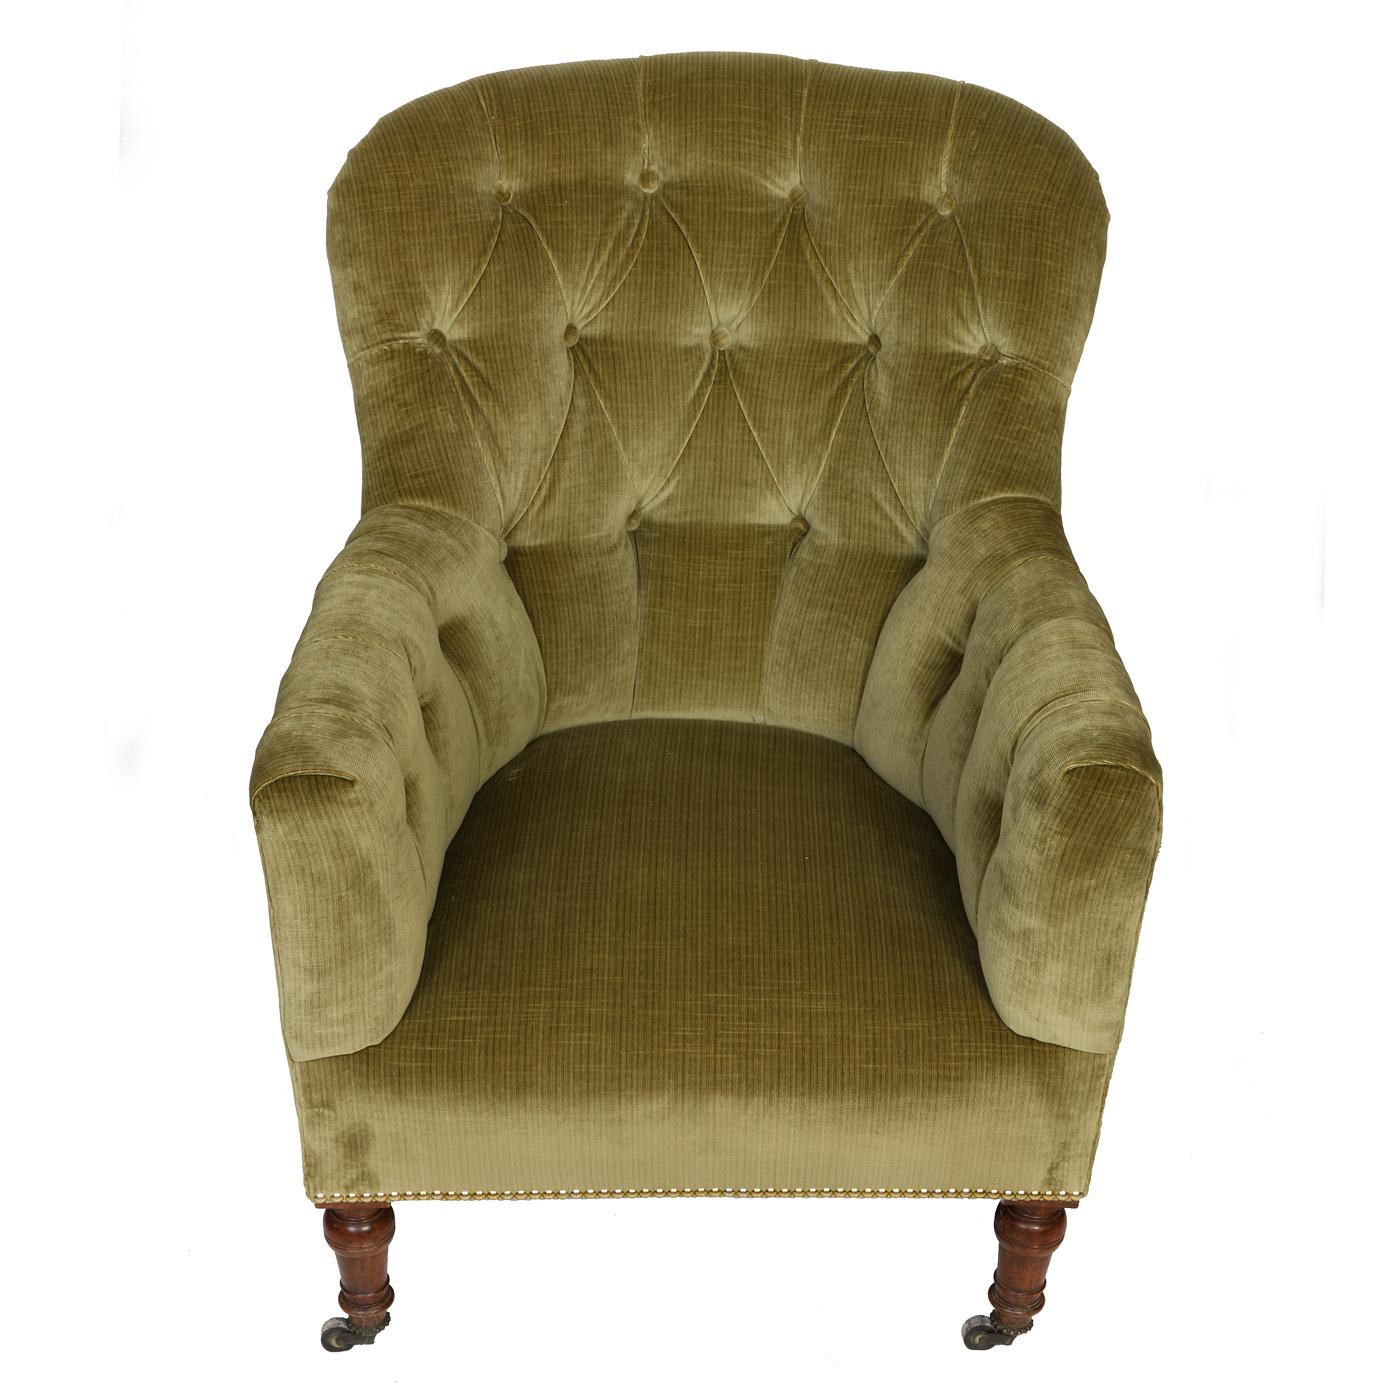 20th Century Pair of Rounded Back Tufted Club Chairs Newly Reupholstered in Green Velvet